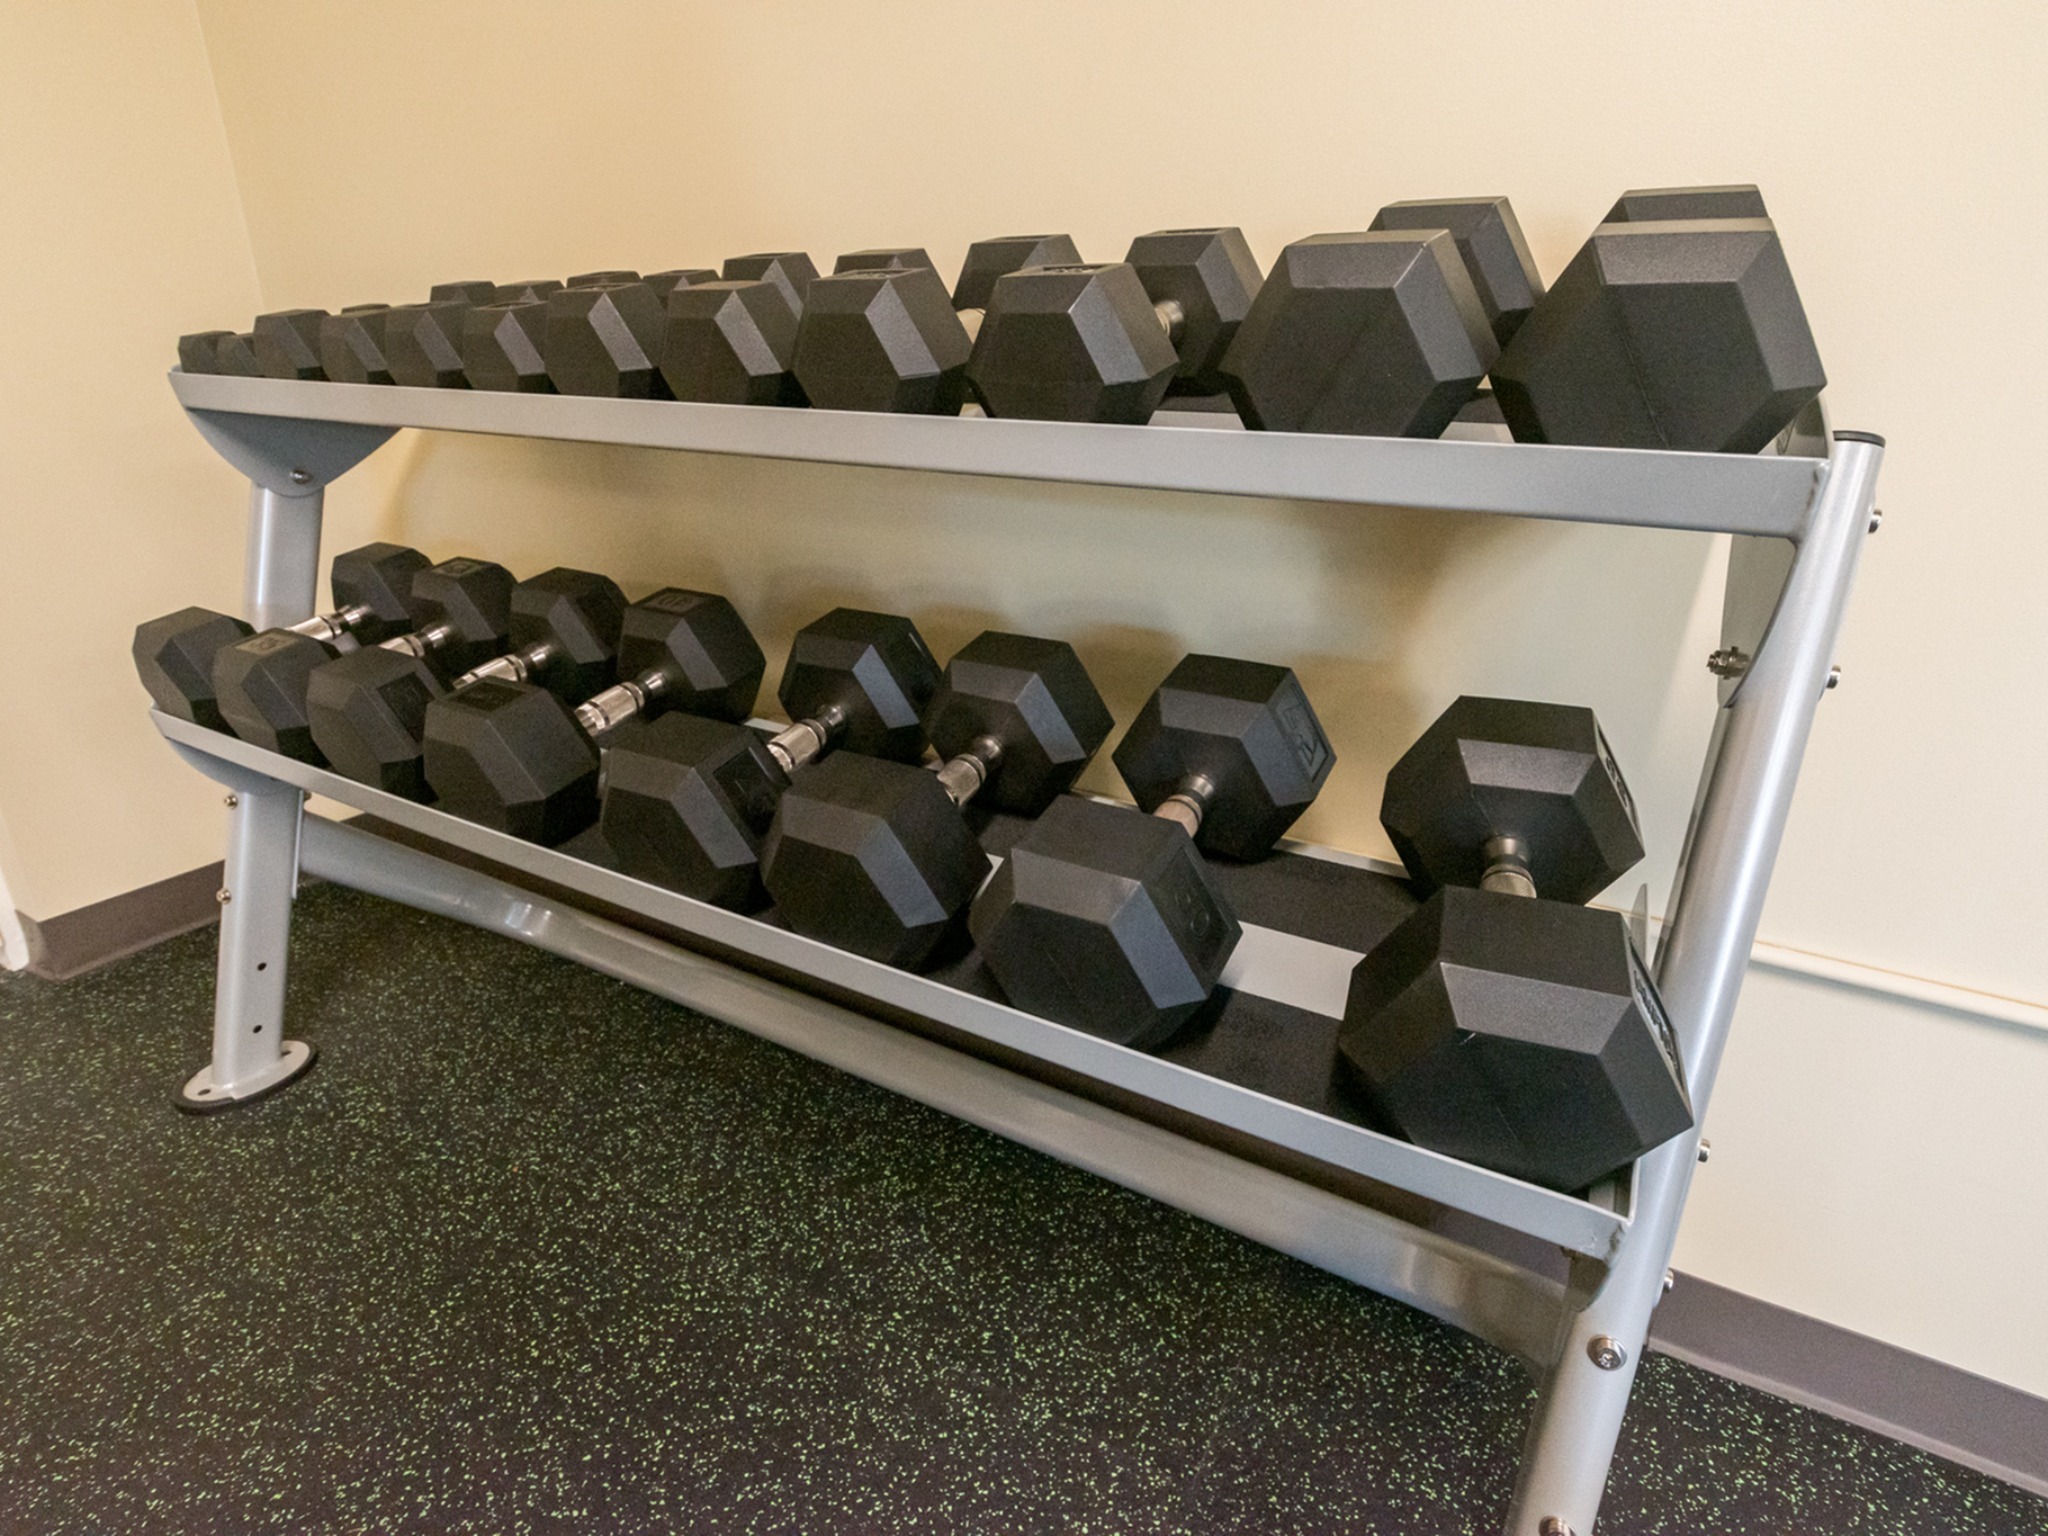 Fitness center area of our community, fitted with dumbells